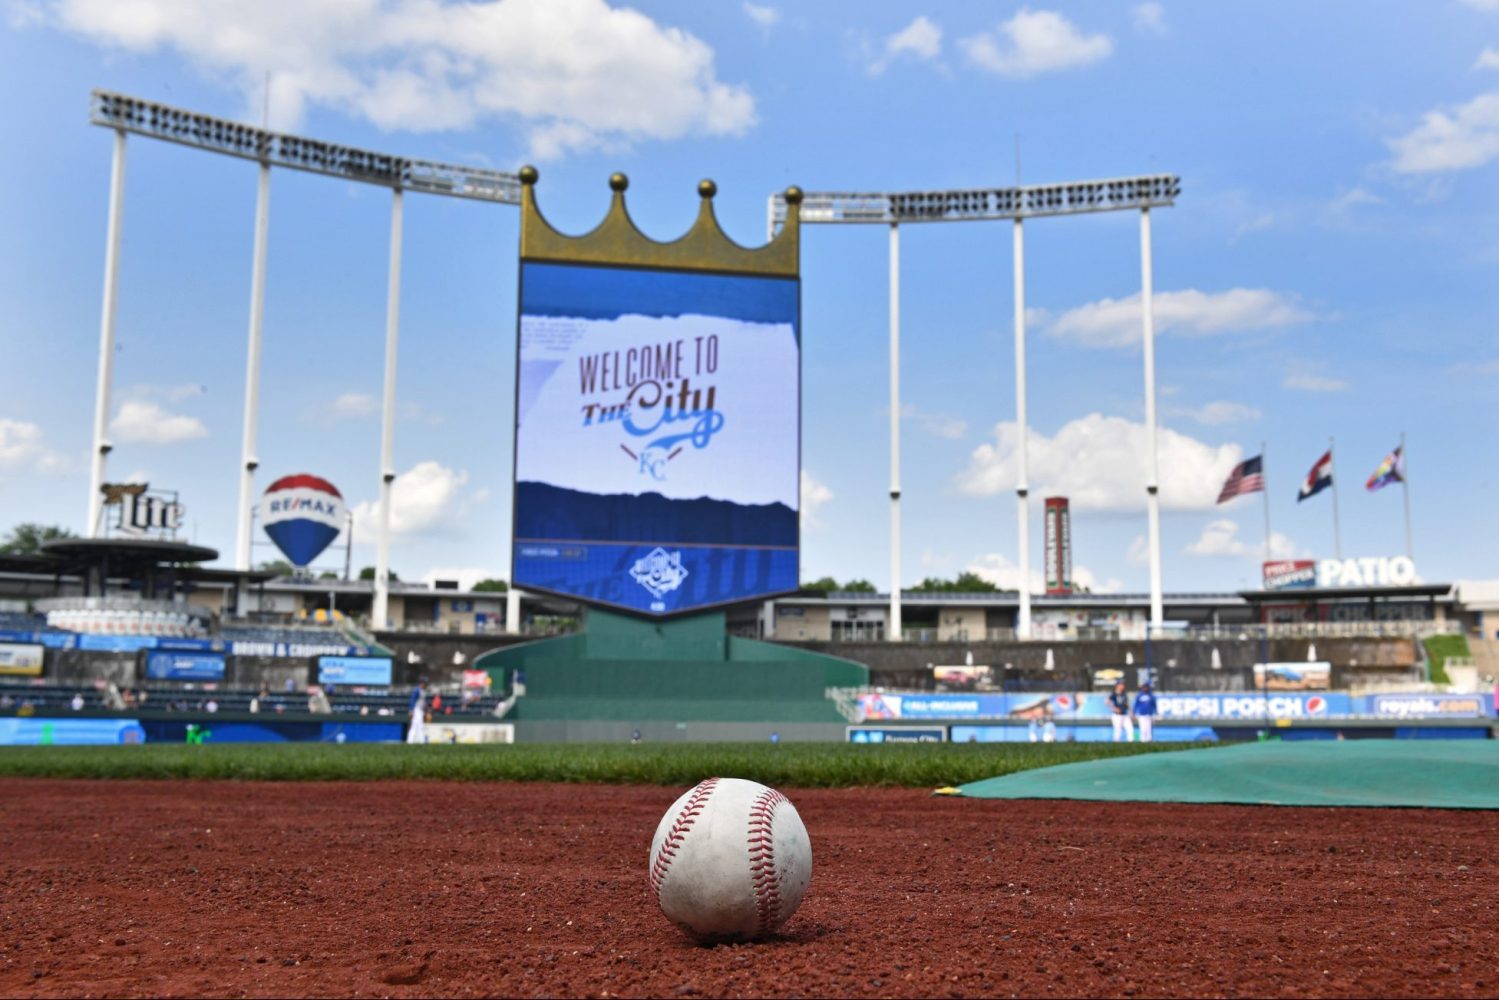 A general view of Kauffman Stadium before a game between the Kansas City Royals and Los Angeles Angels.